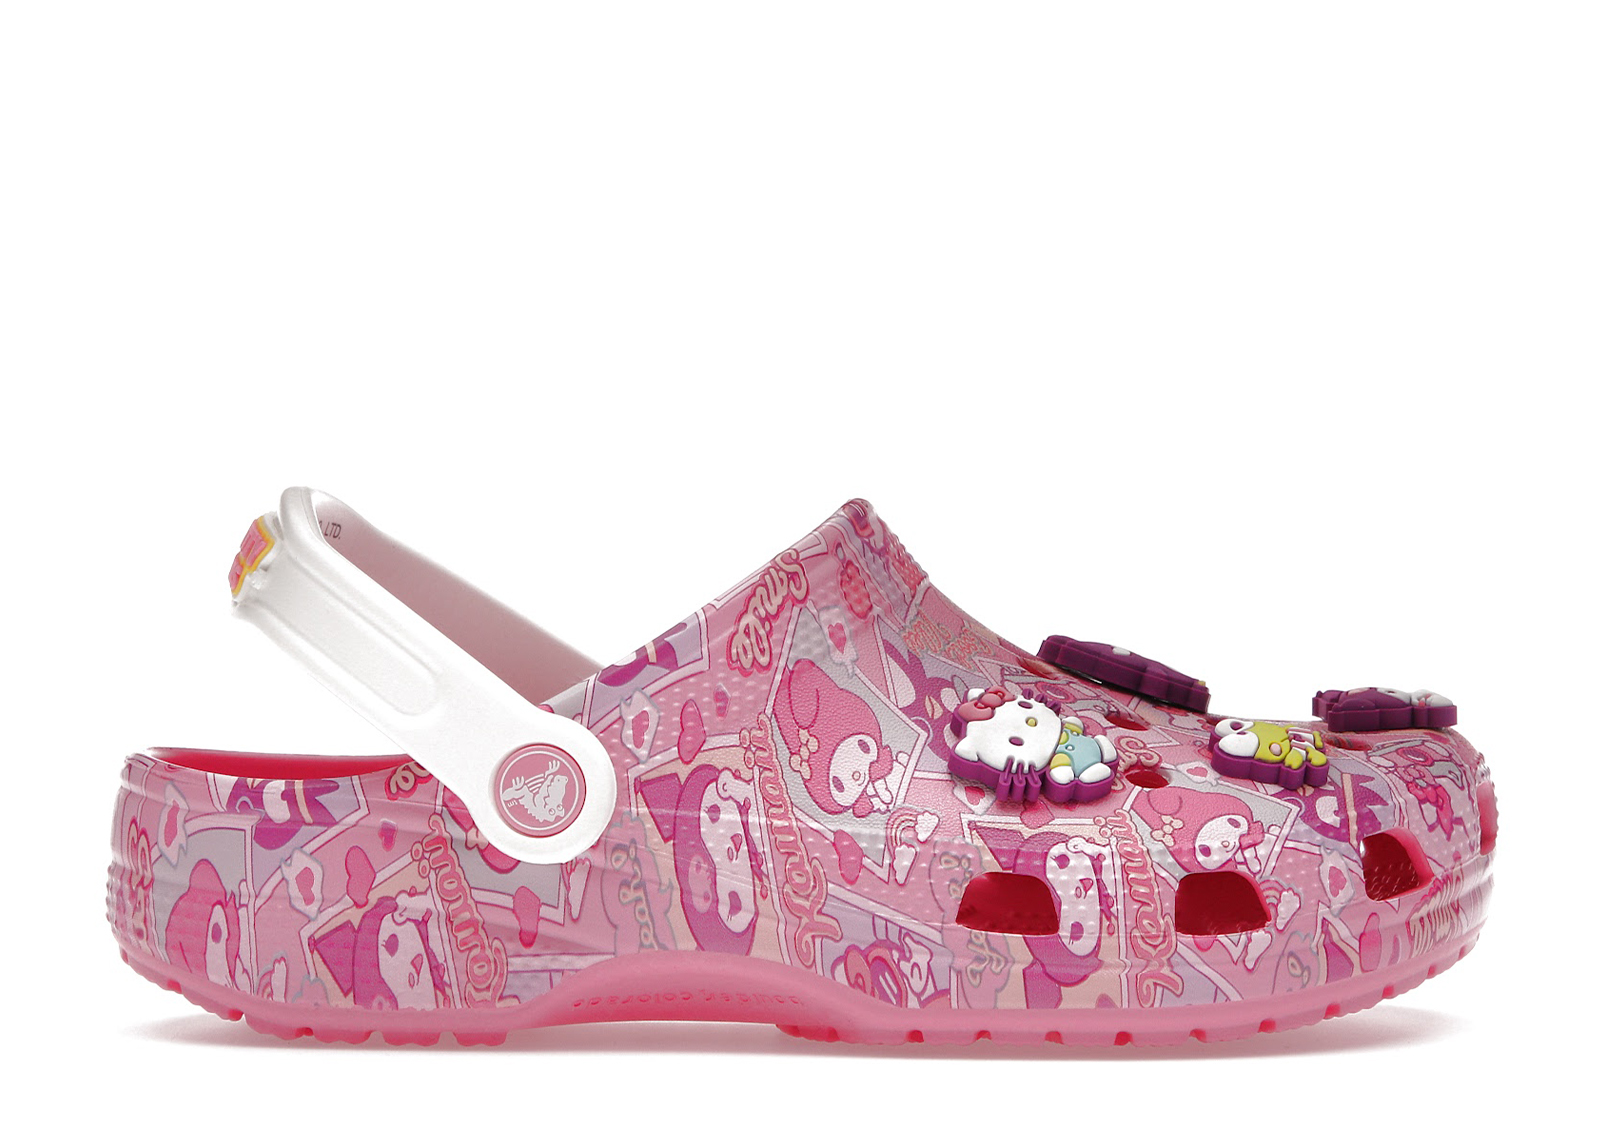 Crocs Classic Clog Hello Kitty and Friends - 208527-680 - US